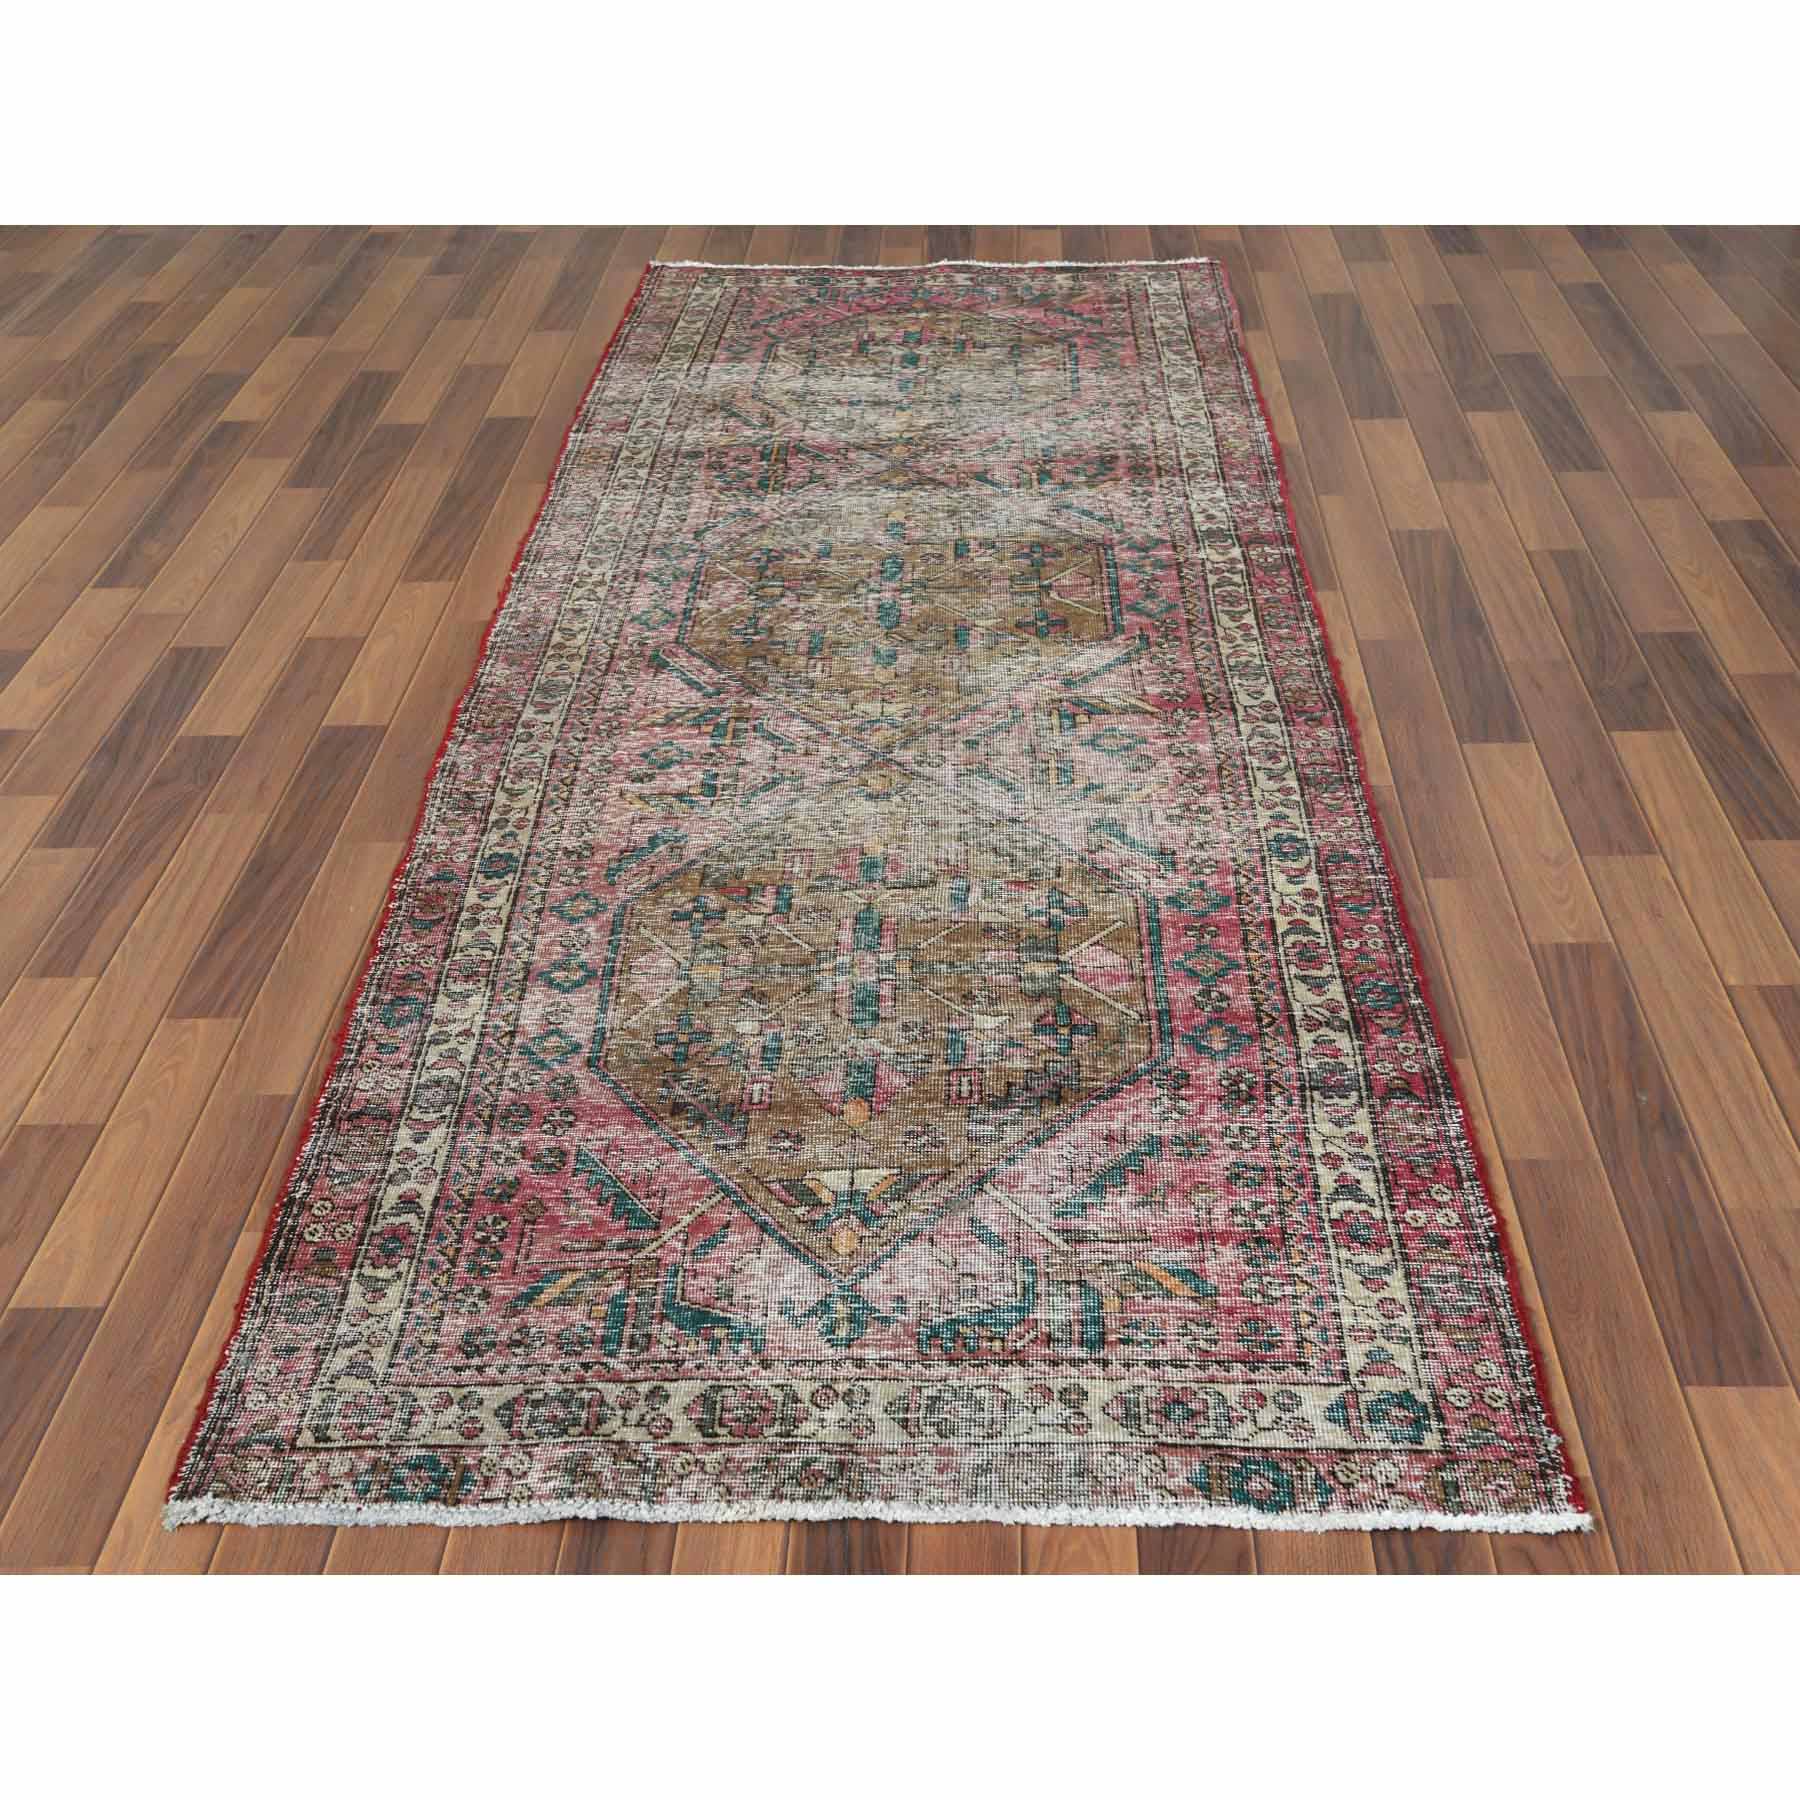 Overdyed-Vintage-Hand-Knotted-Rug-302525